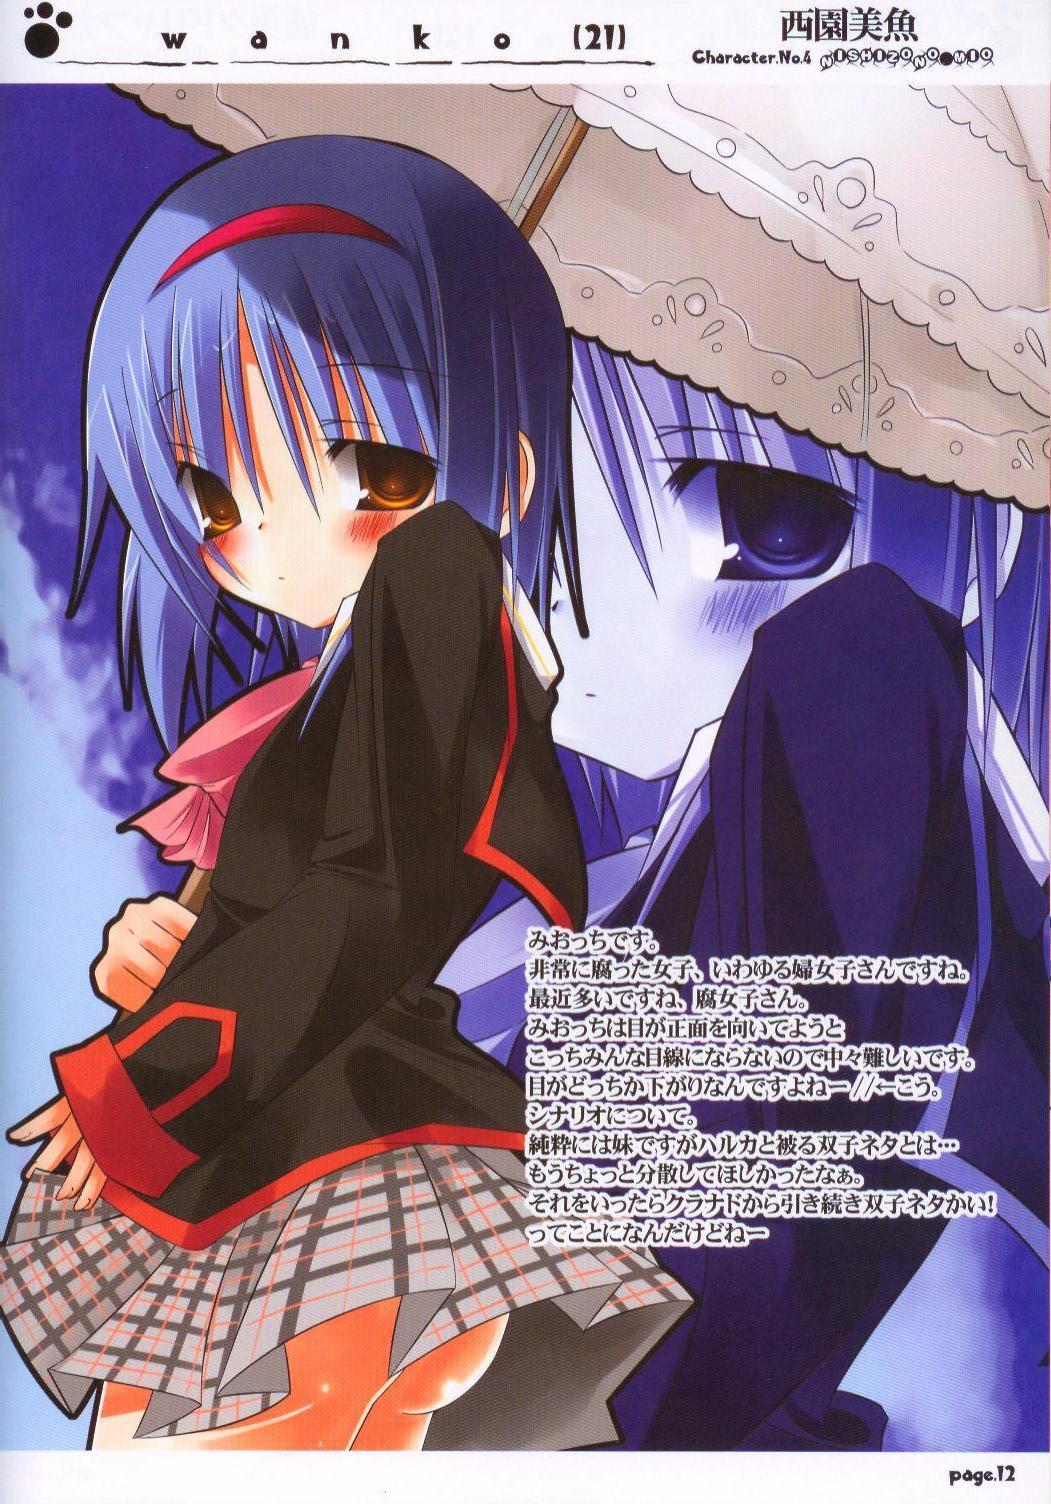 Blows wanko - Little busters Monster - Page 9